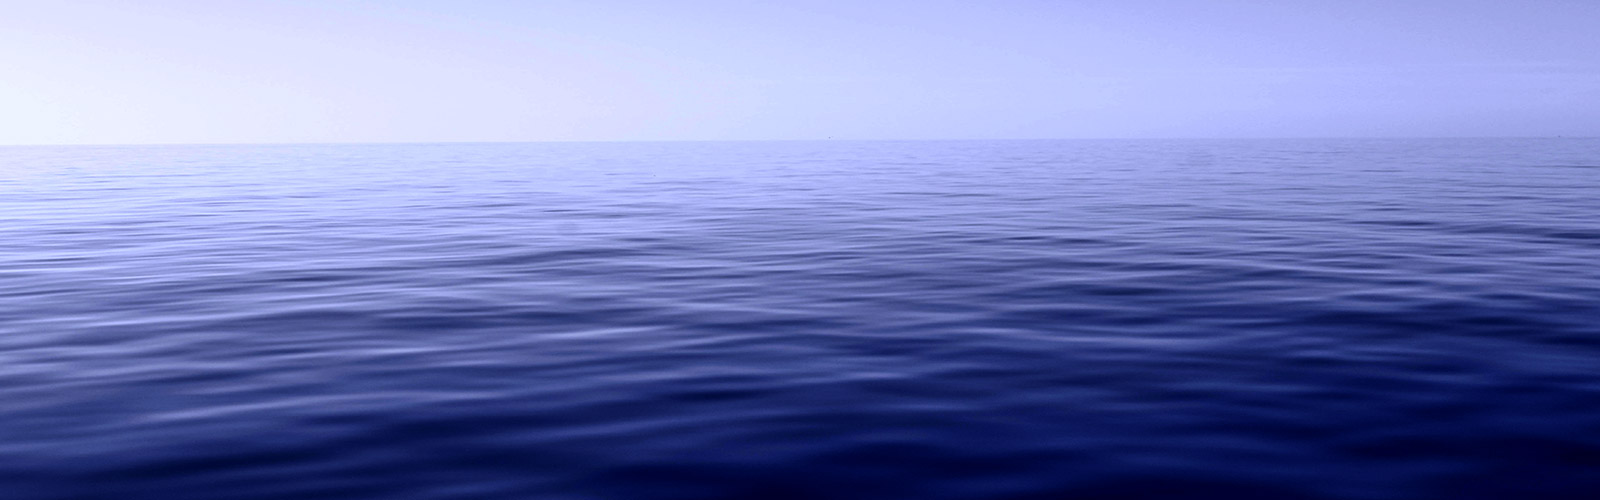 Open ocean with rippled waters